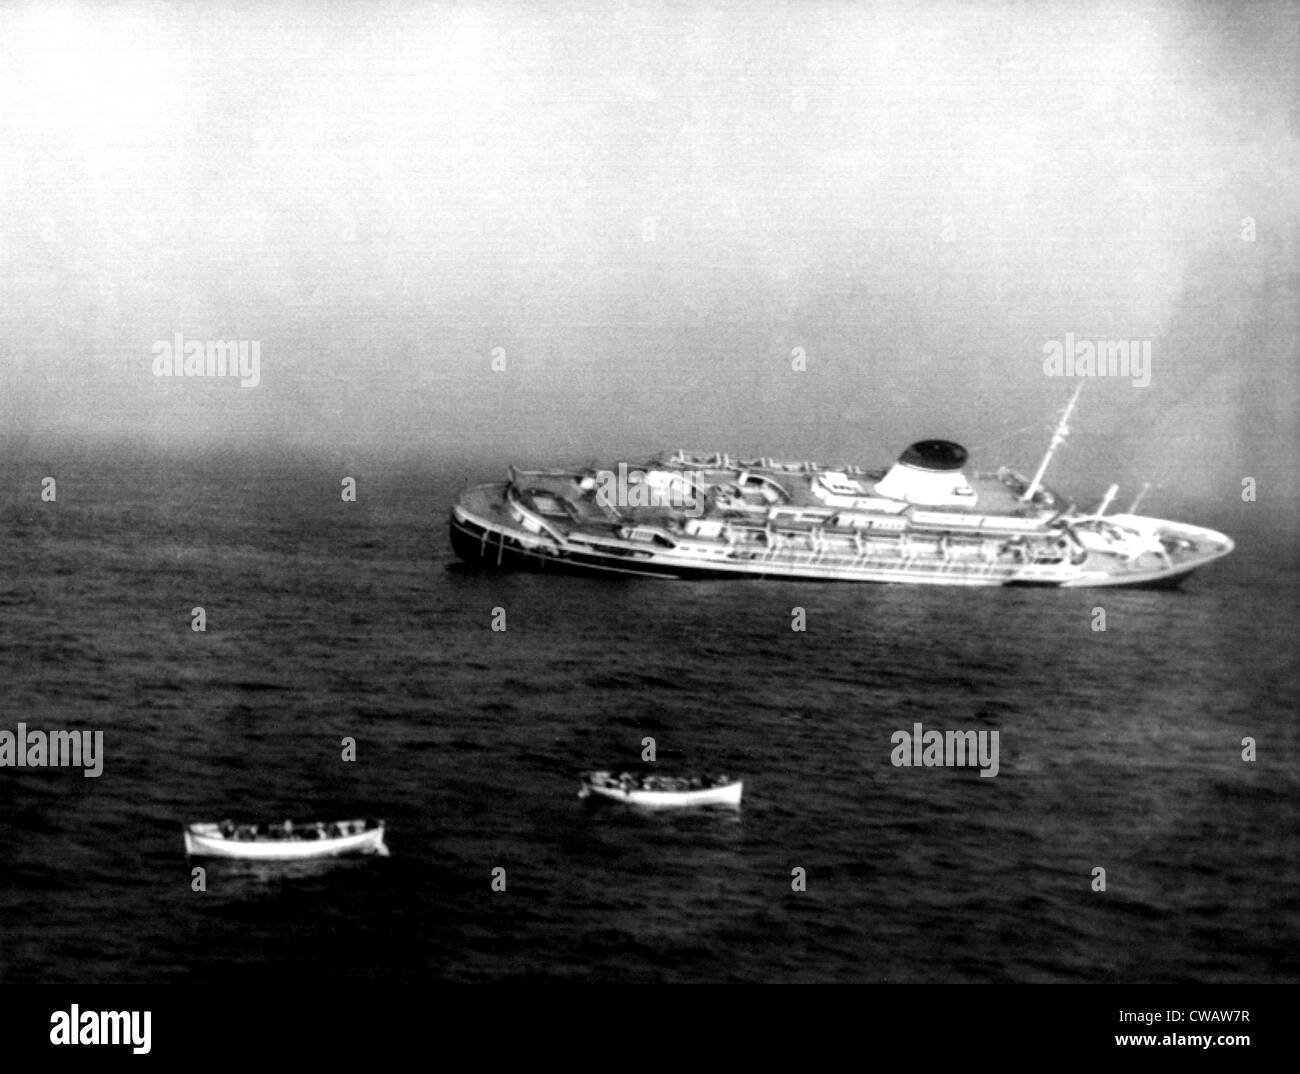 ANDREA DORIA, the Italian ocean liner is sinking in the ocean, 60 miles off of Nantucket Island, July 25, 1956, after its Stock Photo